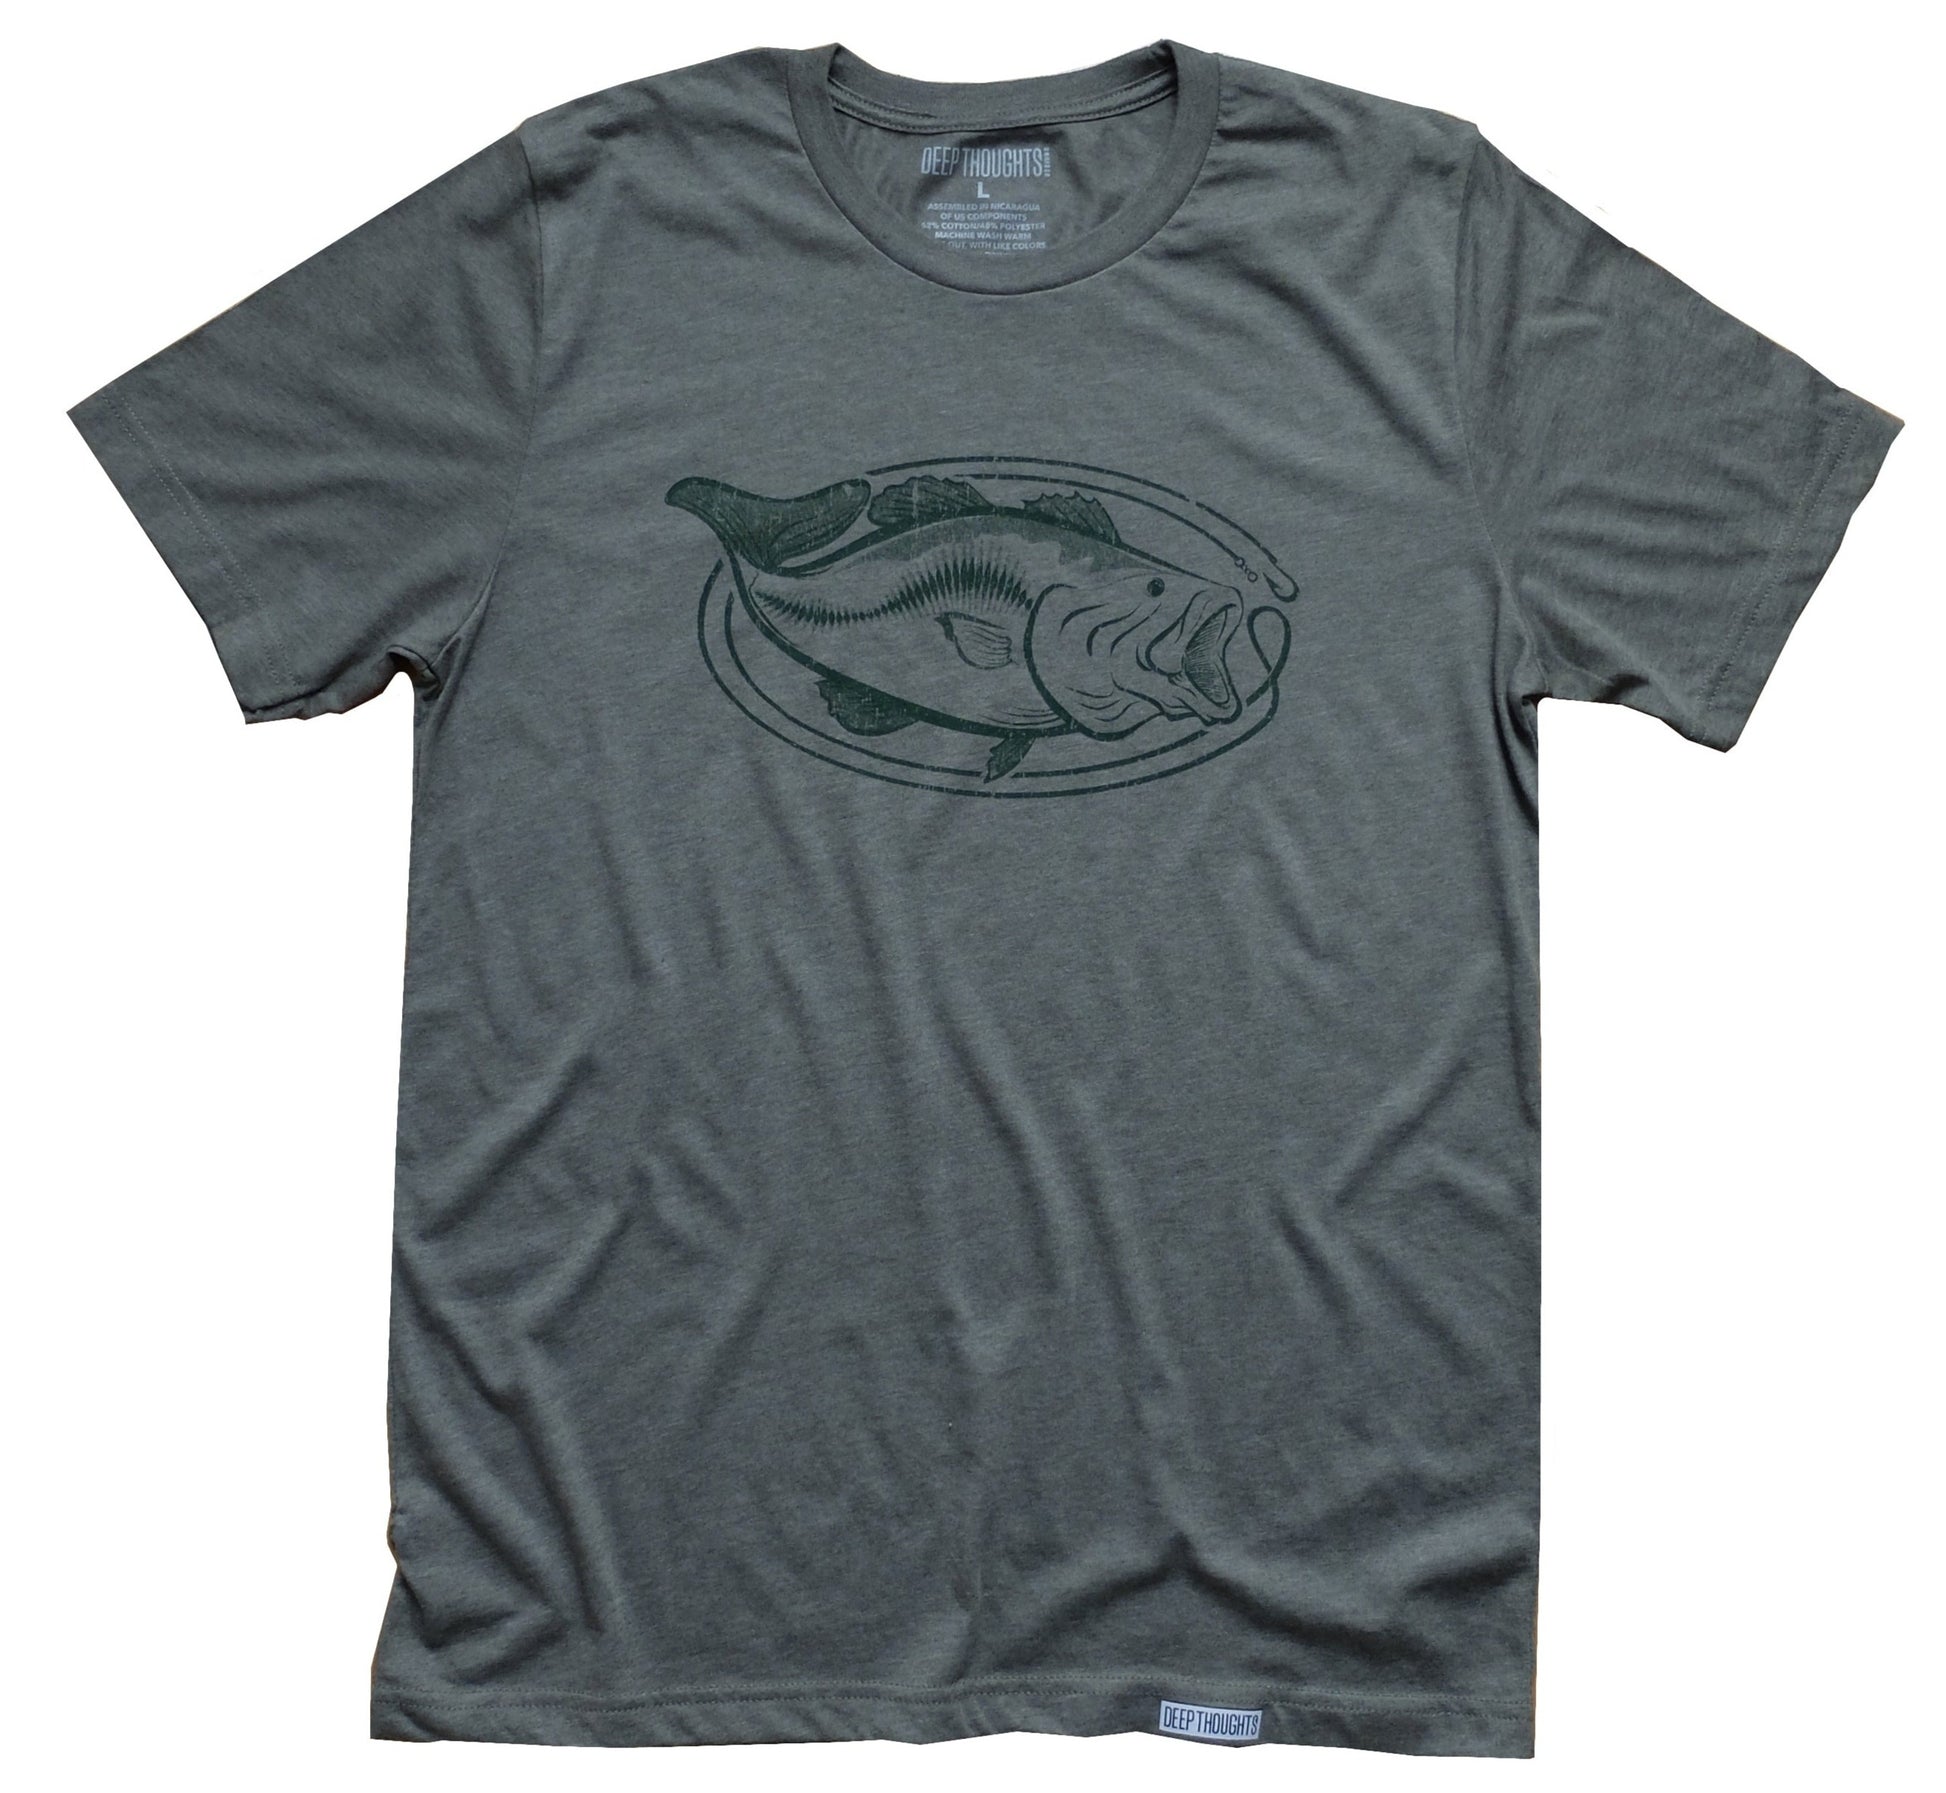 heather army green soft cotton blend t-shirt with dark green oval-shaped largemouth bass fishing graphic